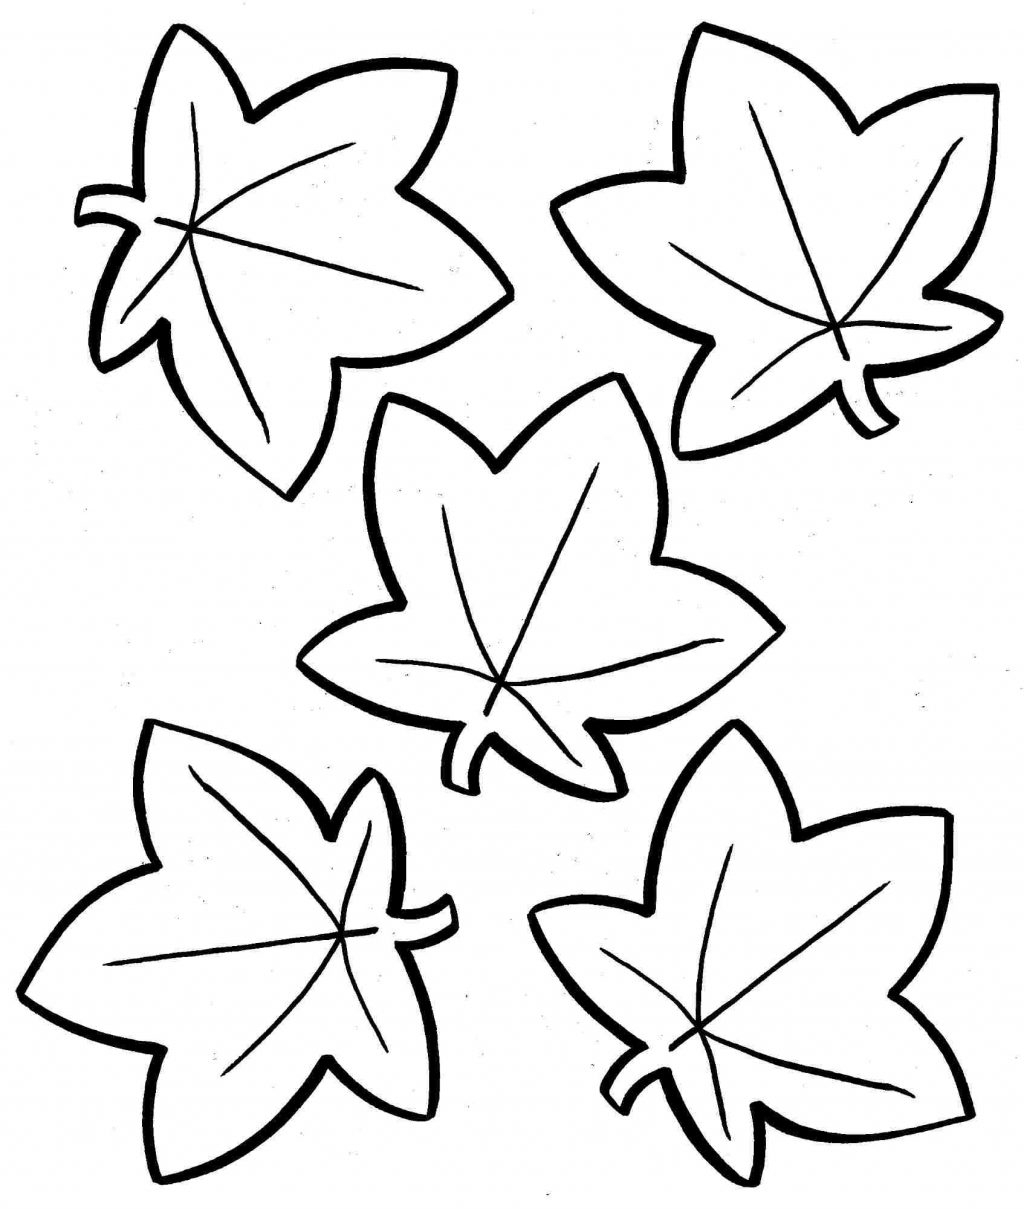 Coloring Pages ~ Free Printable Coloring Pages Autumnavesautumnaves - Free Printable Fall Leaves Coloring Pages